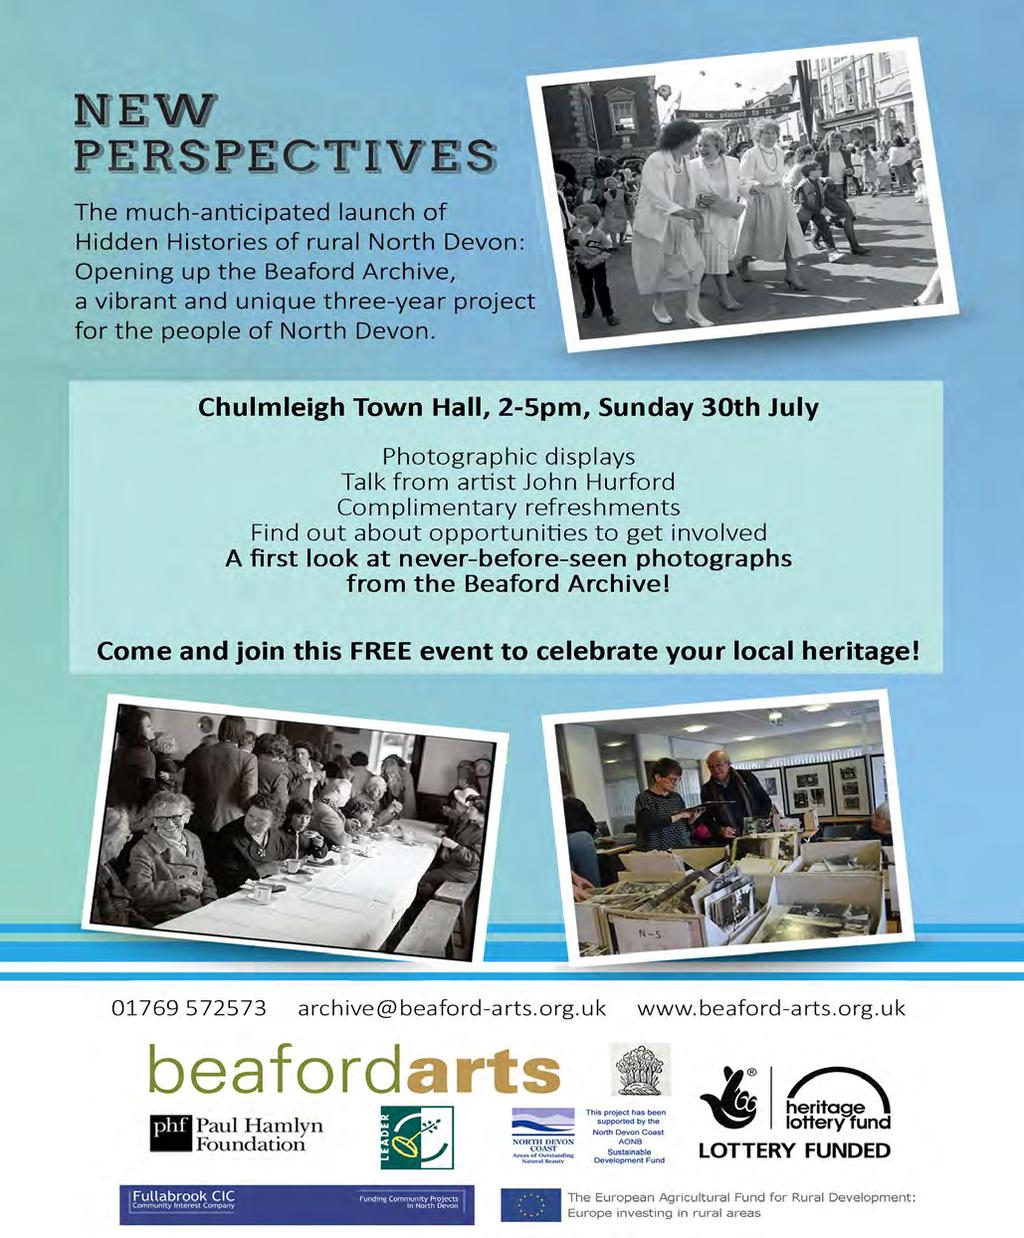 Volunteers Needed Volunteers needed for New Perspectives event! Sunday 30 th July sees the launch of the HIDDEN HISTORIES OF RURAL NORTH DEVON project in Chulmleigh Town Hall, 2-5pm.